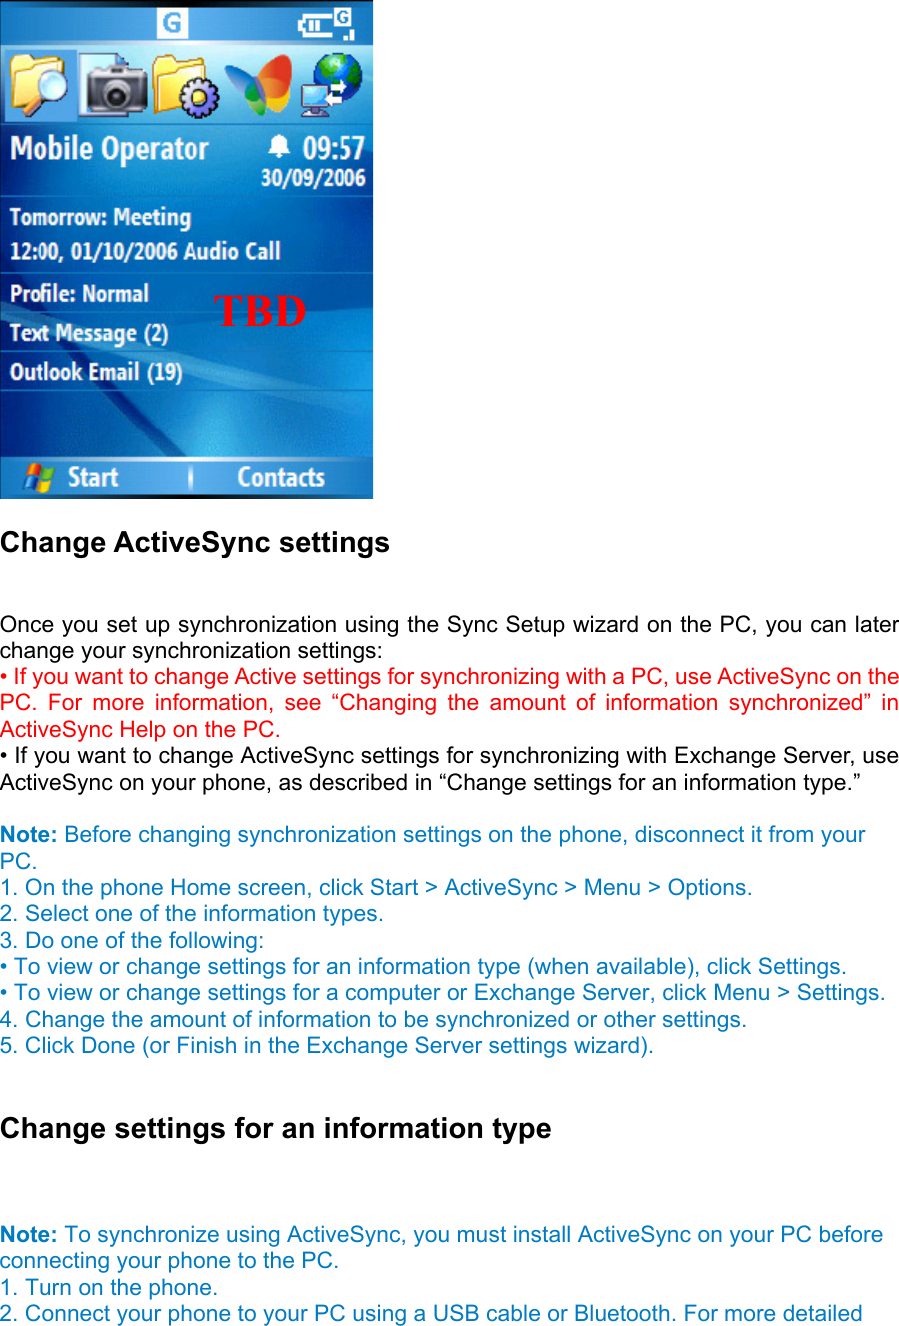  Change ActiveSync settings   Once you set up synchronization using the Sync Setup wizard on the PC, you can later change your synchronization settings:   • If you want to change Active settings for synchronizing with a PC, use ActiveSync on the PC. For more information, see “Changing the amount of information synchronized” in ActiveSync Help on the PC.   • If you want to change ActiveSync settings for synchronizing with Exchange Server, use ActiveSync on your phone, as described in “Change settings for an information type.”    Note: Before changing synchronization settings on the phone, disconnect it from your PC.  1. On the phone Home screen, click Start &gt; ActiveSync &gt; Menu &gt; Options.   2. Select one of the information types.   3. Do one of the following:   • To view or change settings for an information type (when available), click Settings.   • To view or change settings for a computer or Exchange Server, click Menu &gt; Settings.   4. Change the amount of information to be synchronized or other settings.   5. Click Done (or Finish in the Exchange Server settings wizard).    Change settings for an information type  Note: To synchronize using ActiveSync, you must install ActiveSync on your PC before connecting your phone to the PC.   1. Turn on the phone.   2. Connect your phone to your PC using a USB cable or Bluetooth. For more detailed  TBD    